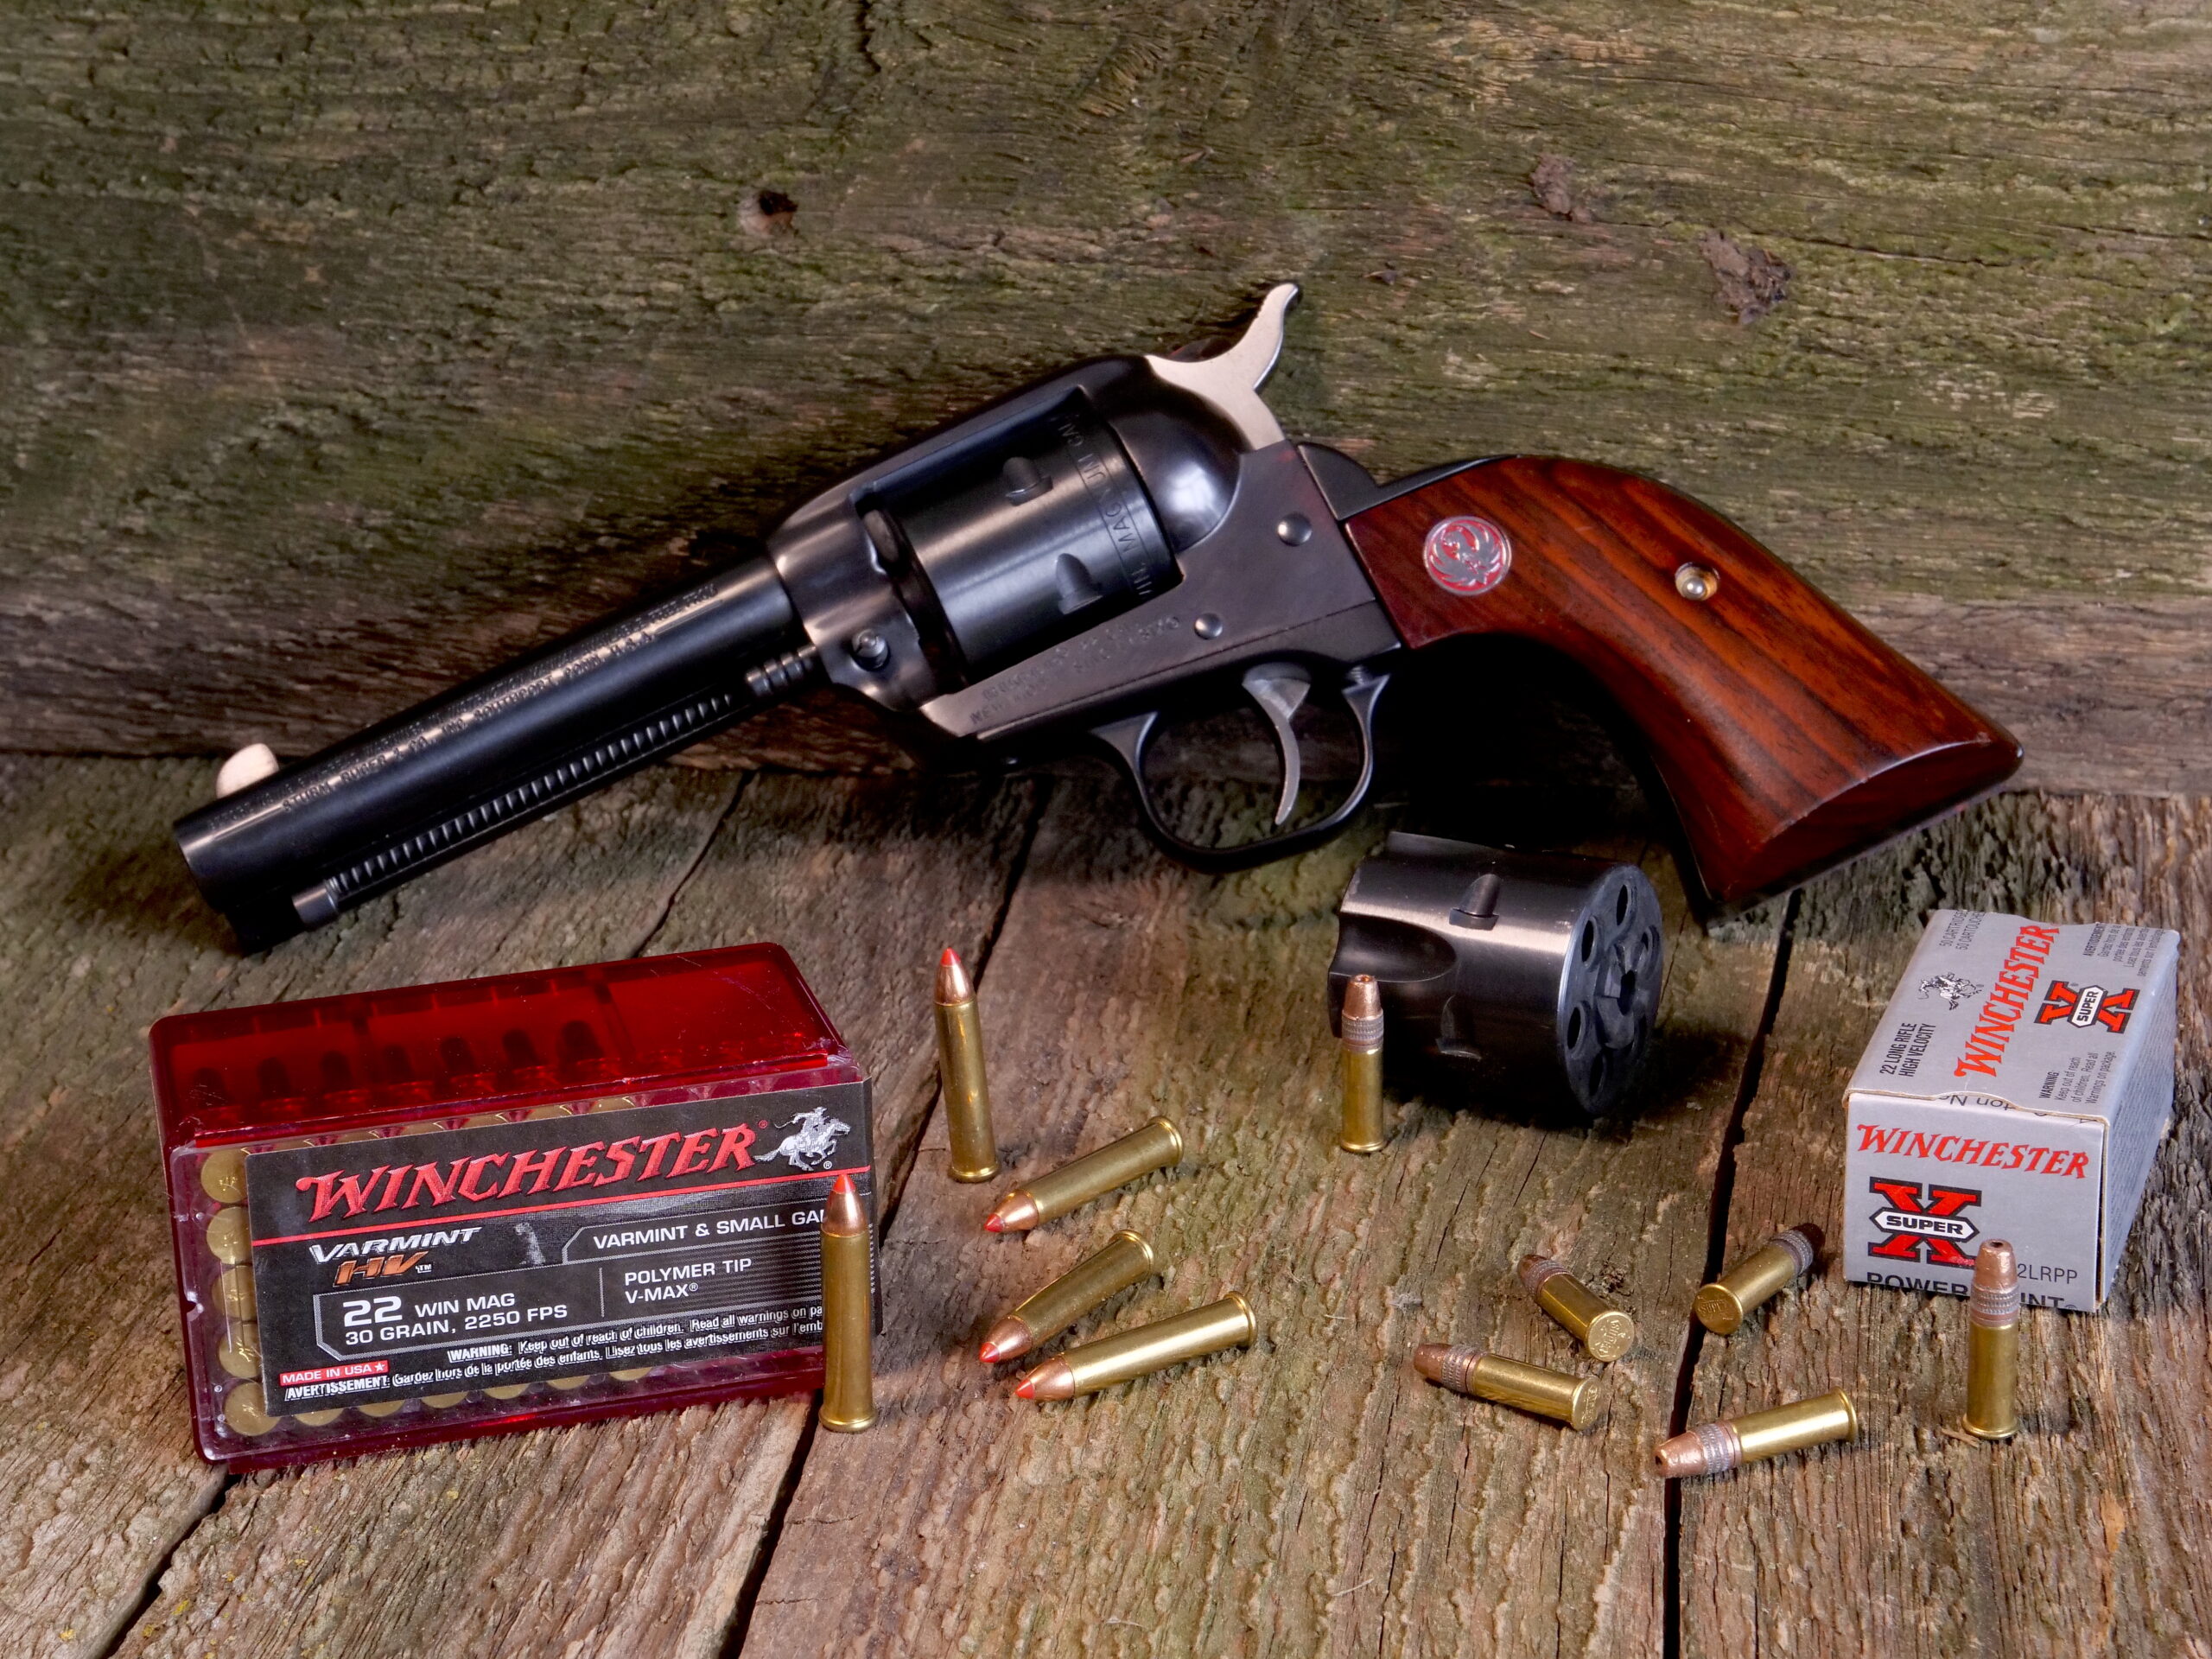 The .22 Mag has a muzzle velocity 650 fps faster than the .22 LR.